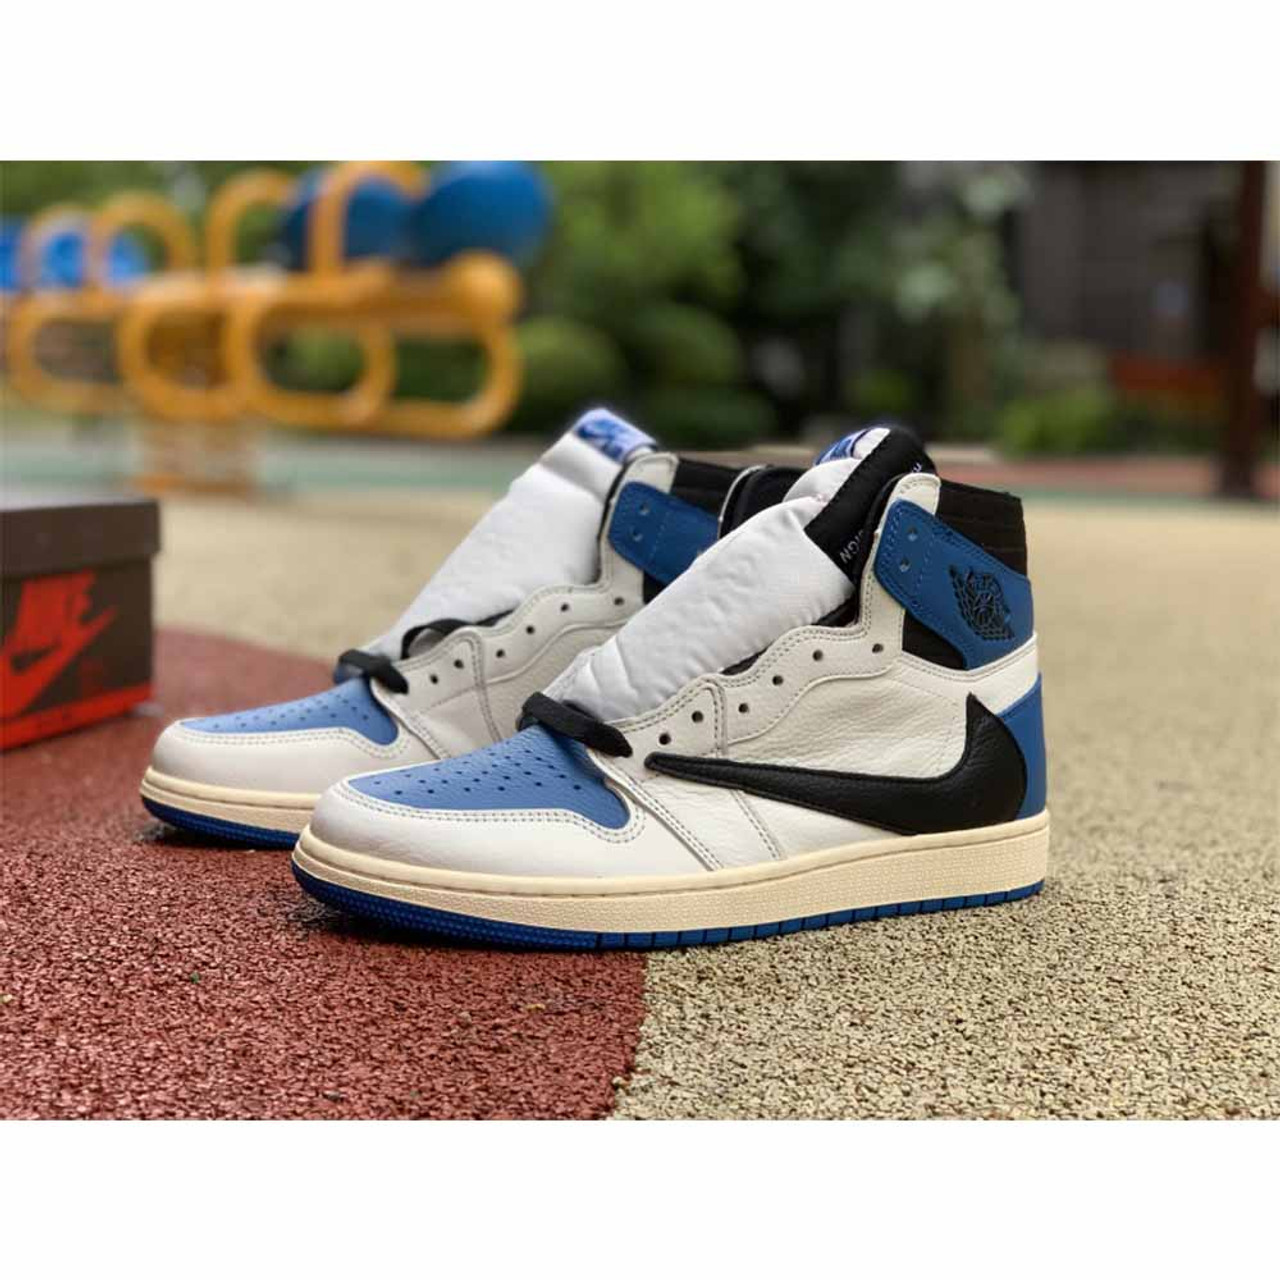 Where To Buy The Best Stockx High Quality Replica Ua Travis Scott X Fragment Air Jordan 1 High Og Sp Military Blue 1 Sneaker Hypedripz Is The Best High Quality Trusted Clone